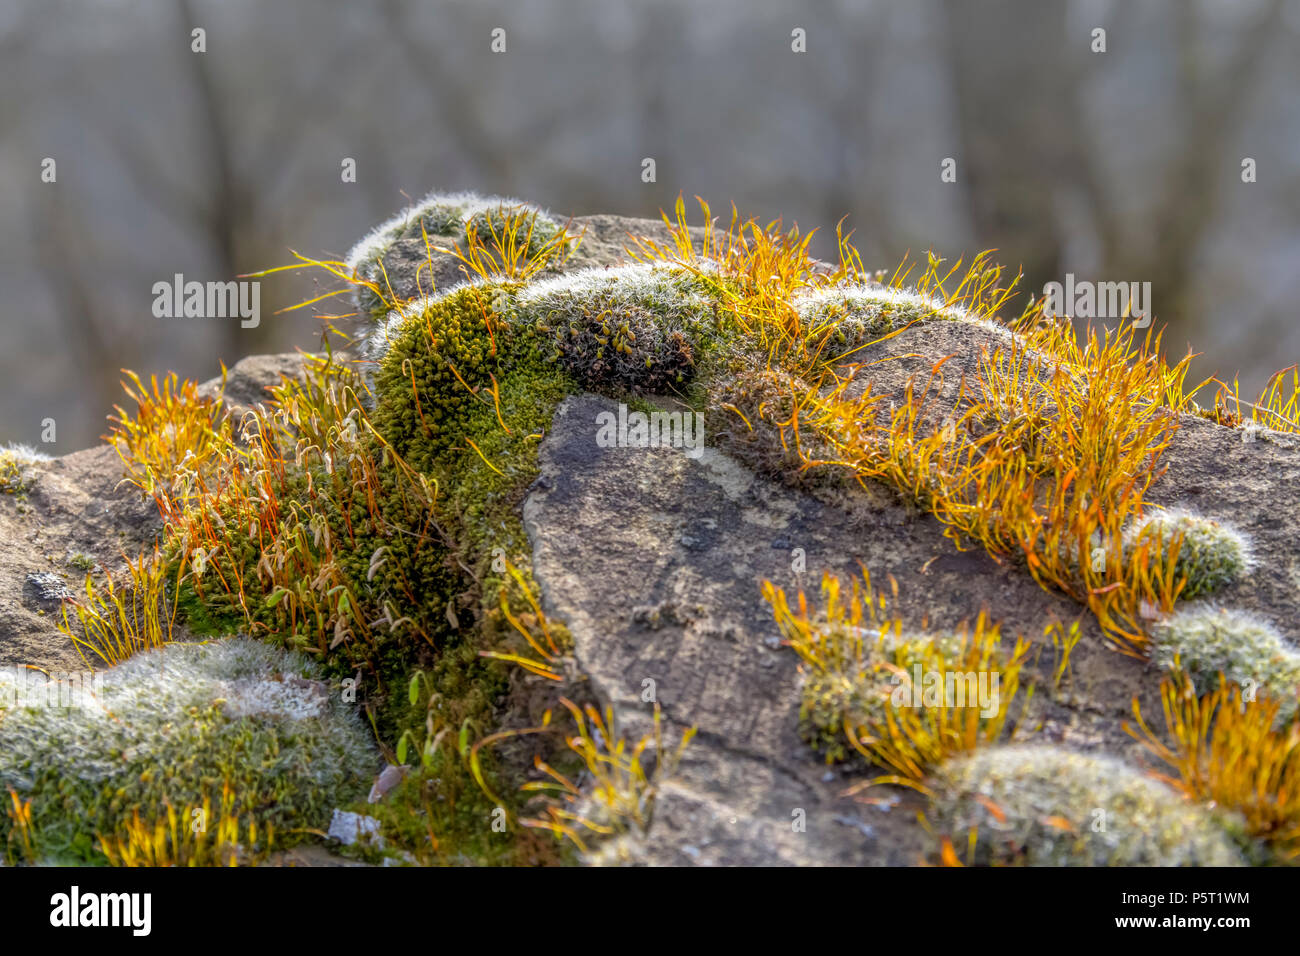 low angle closeup shot showing some moss vegetation on grey stone in natural back Stock Photo